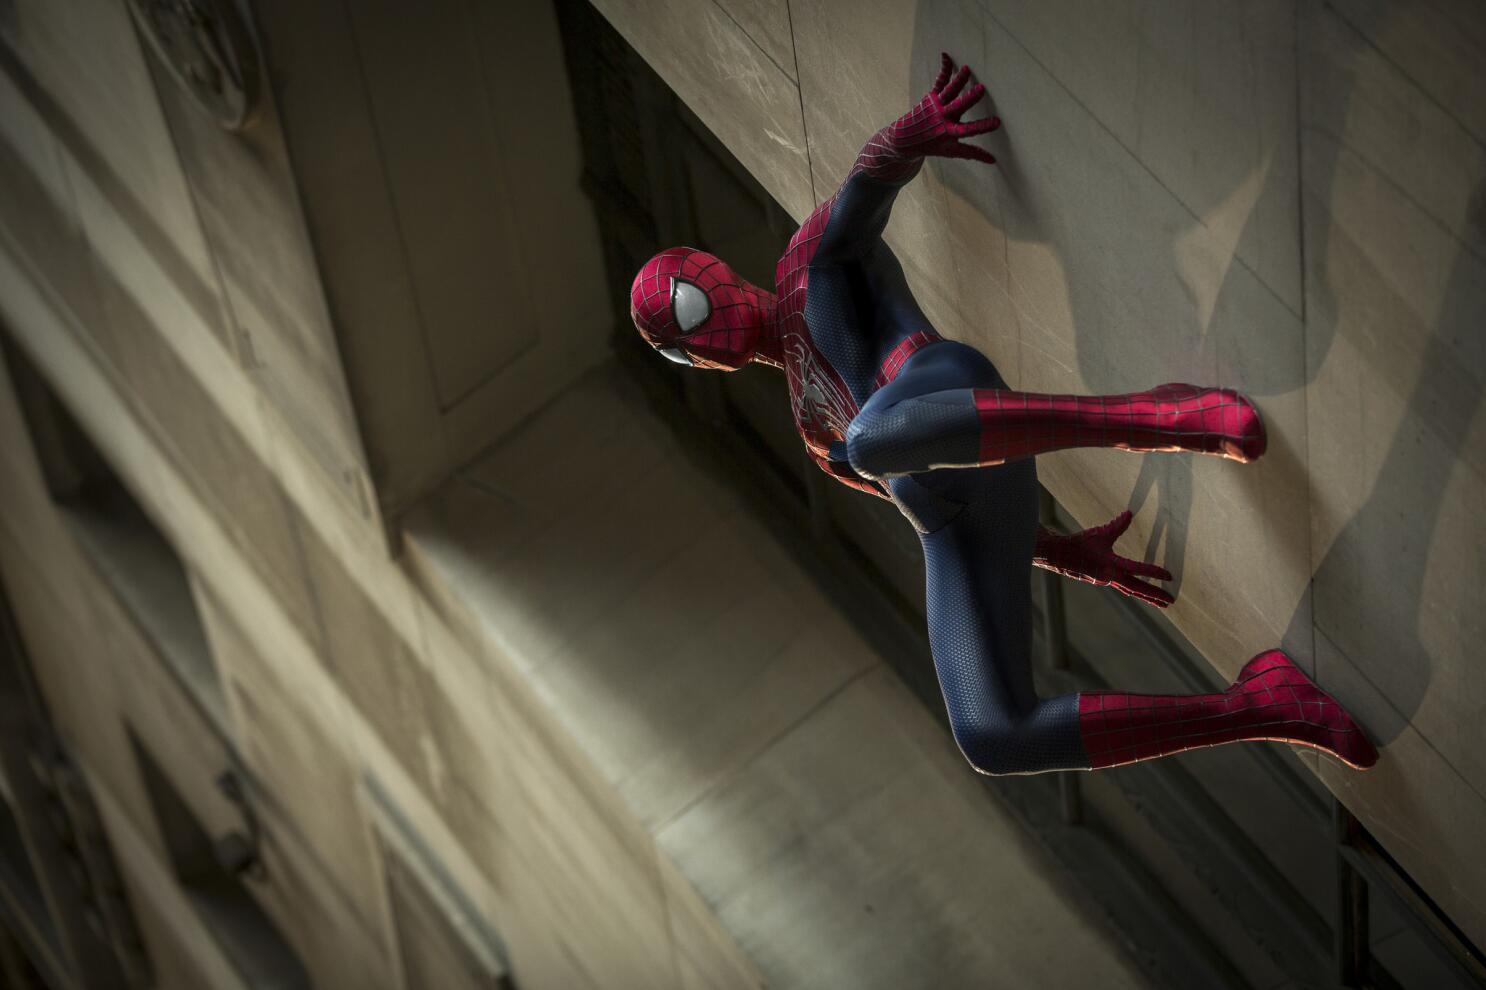 Amazing Spider-Man 2' Reviews: Plot Is Too Tangled, Chemistry Perfect